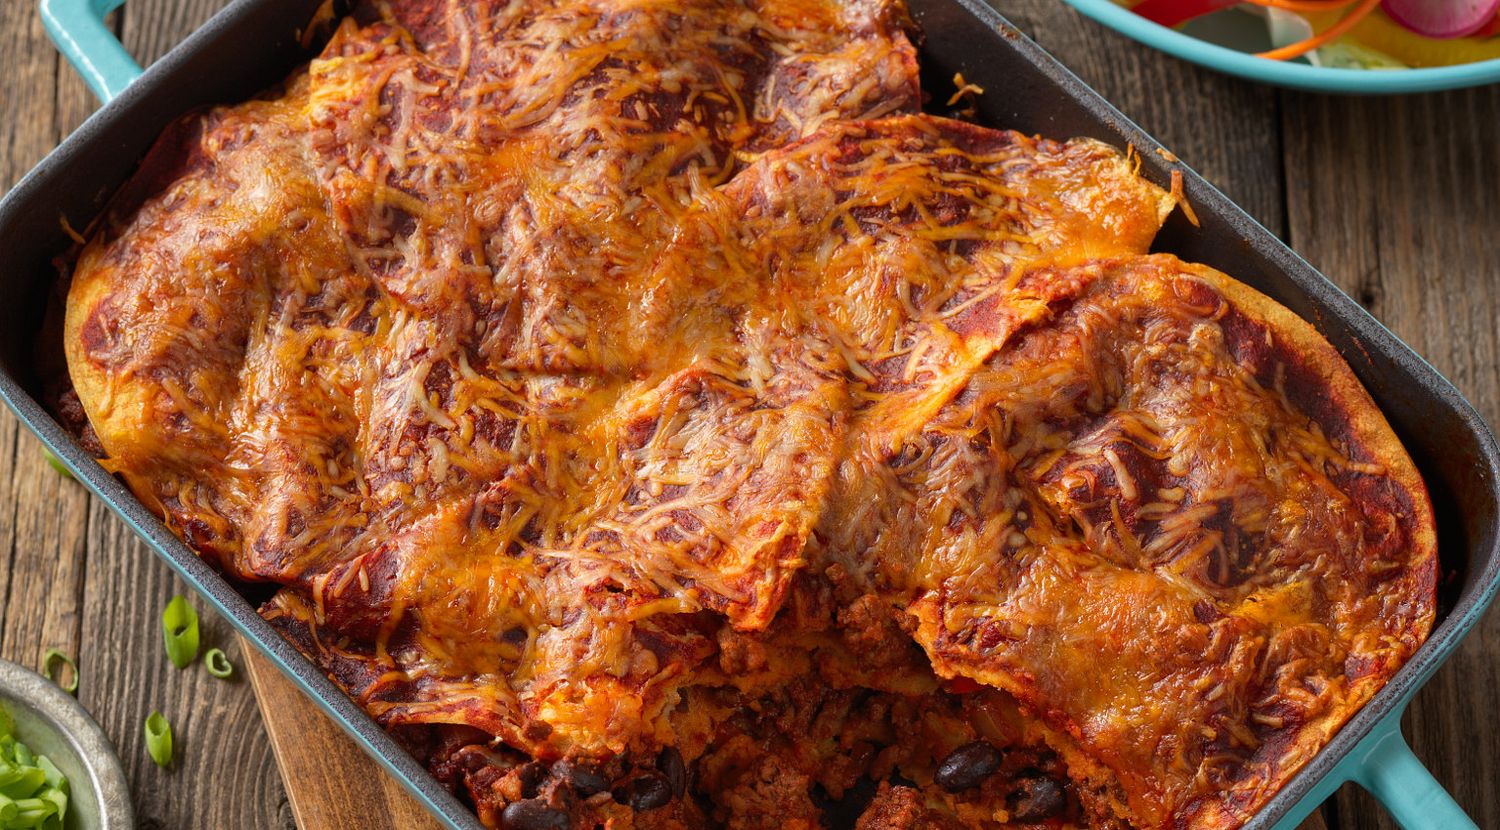 Spicy Mexican Beef Bake